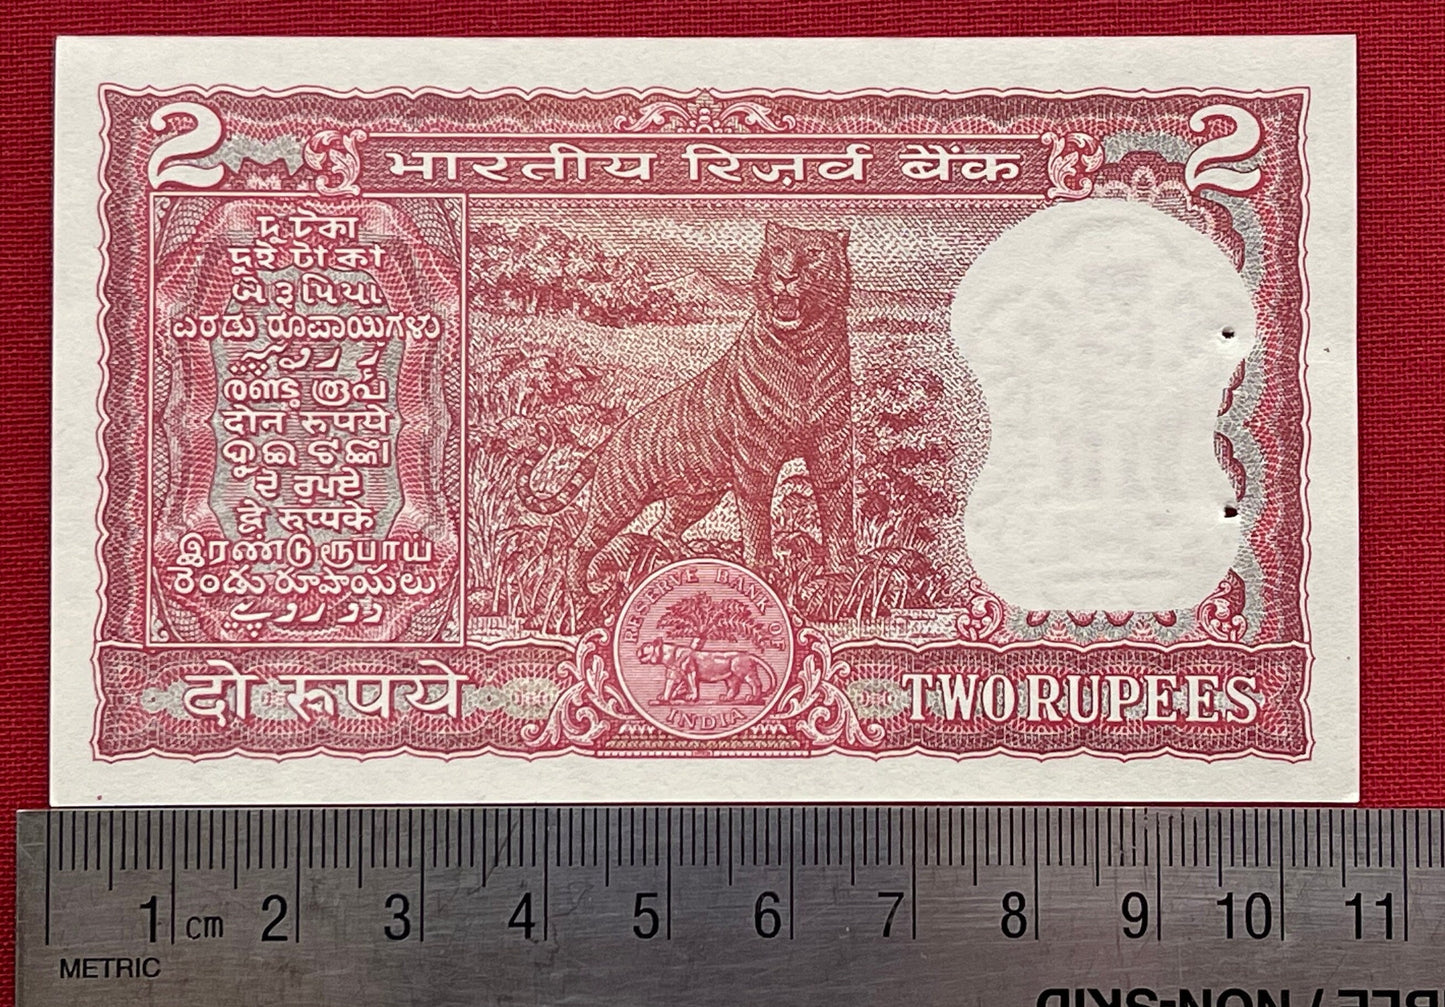 Royal Bengal Tiger & Ashoka Lion Capitol 2 Rupees India Authentic Banknote Money for Jewelry and Crafts Making (Watermark)